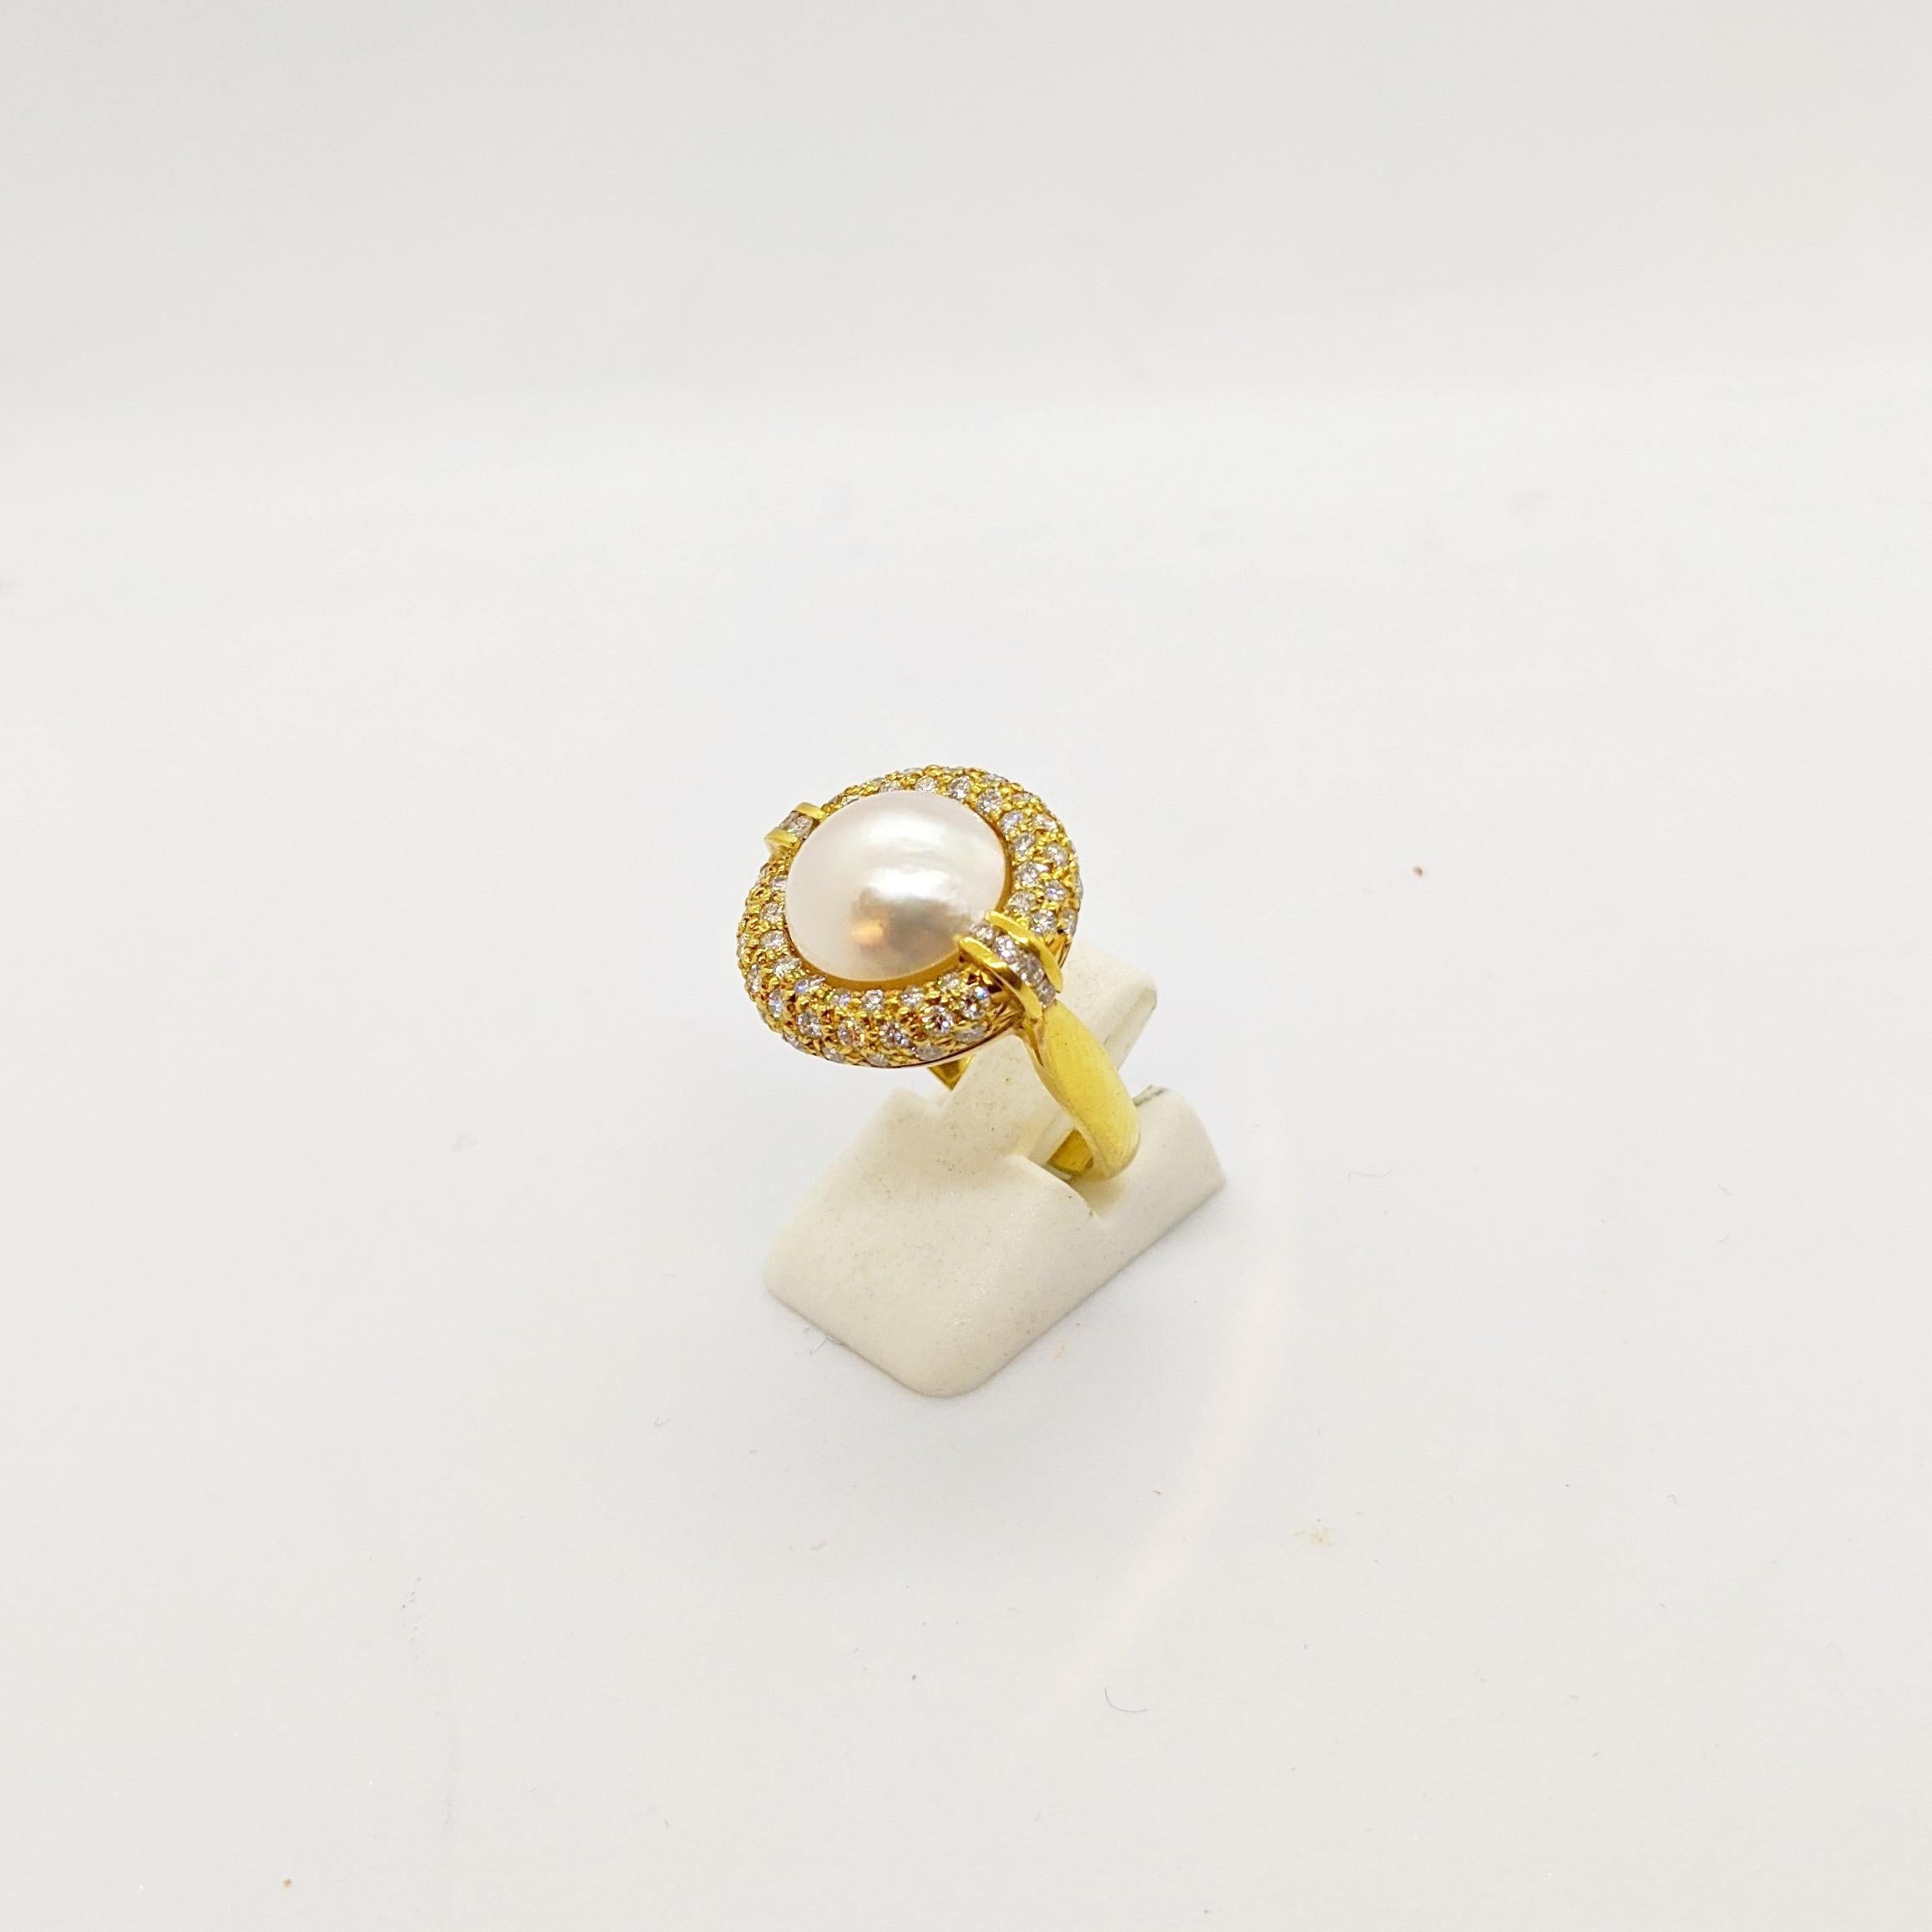 Round Cut 18 Karat Yellow Gold Mabe Pearl Ring with 1.45 Carat Diamond Halo For Sale